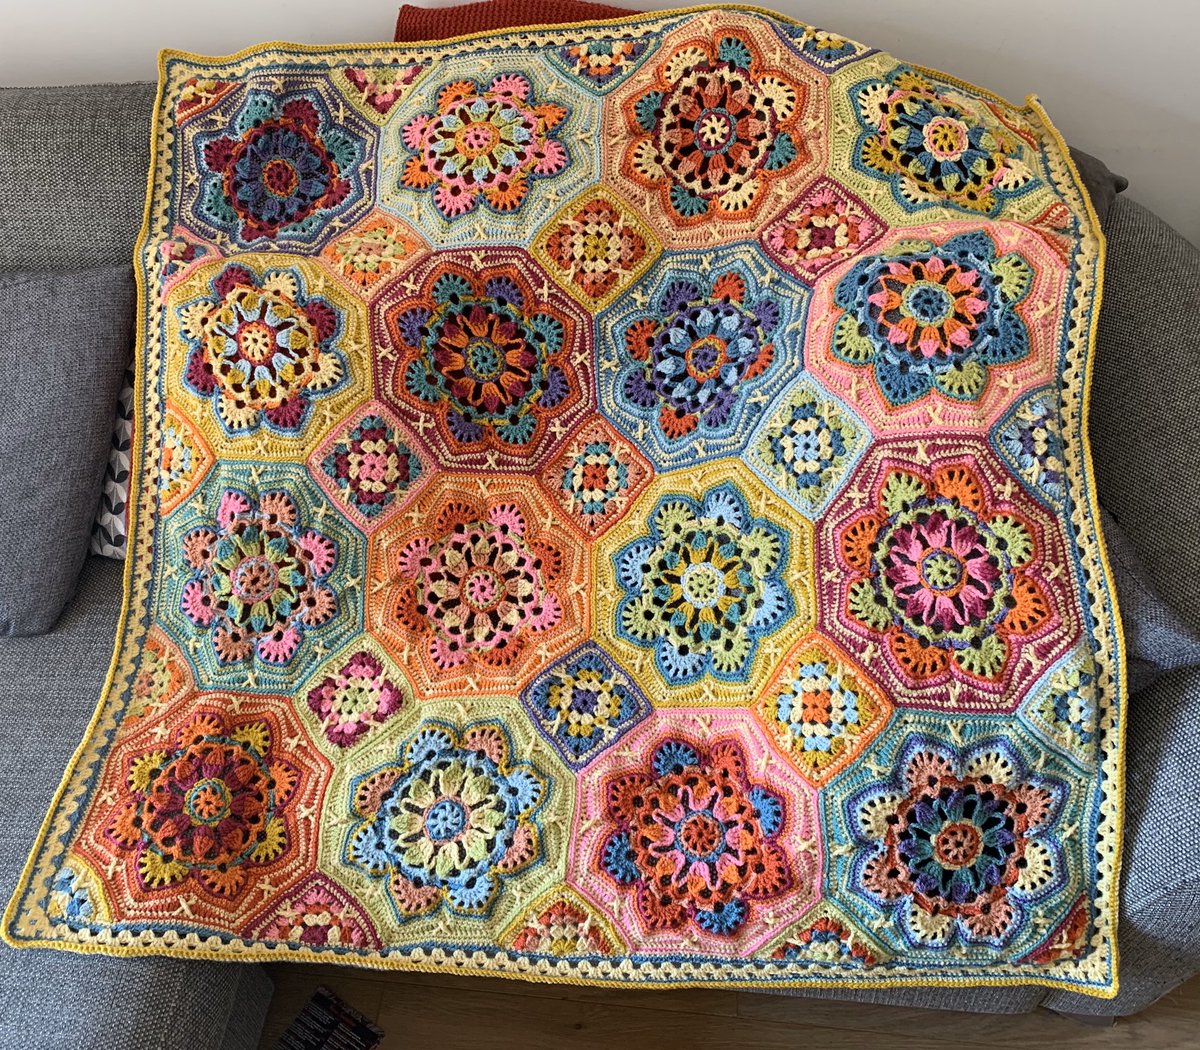 After nearly 5 months, 14 balls of wool, and quite a lot of swearing, I am delighted to say that my Persian Tiles - Eastern Jewels blanket is complete!  #crochet 